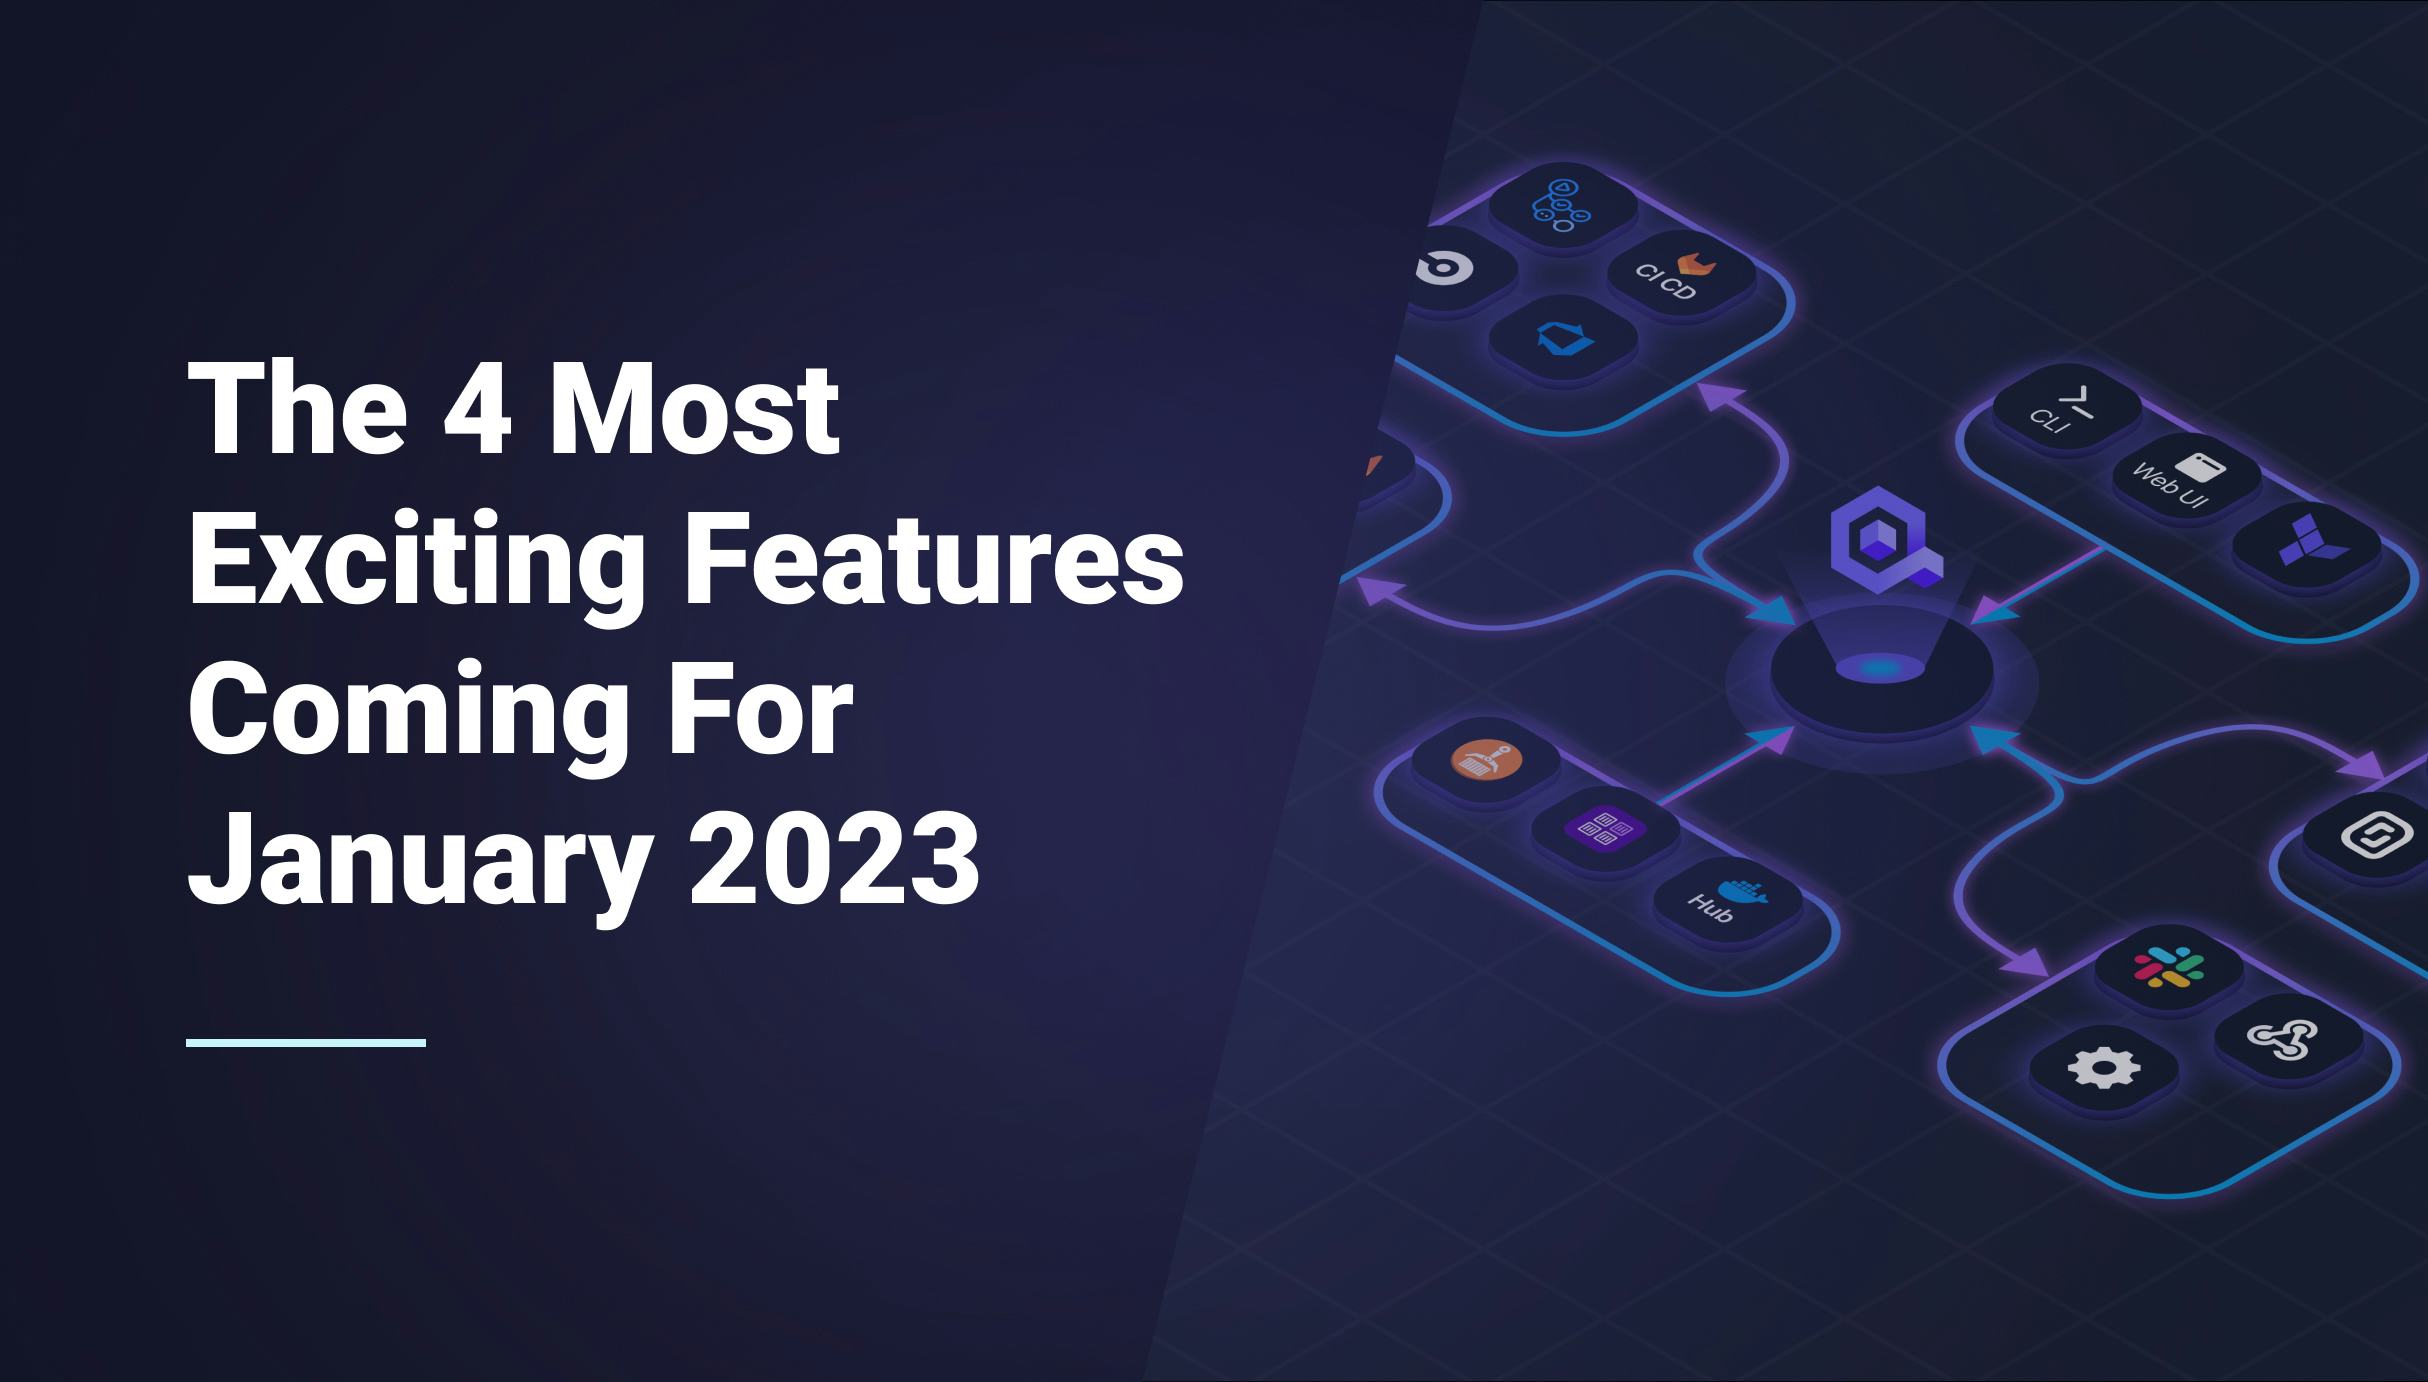 The 4 Most Exciting Features Coming For January 2023